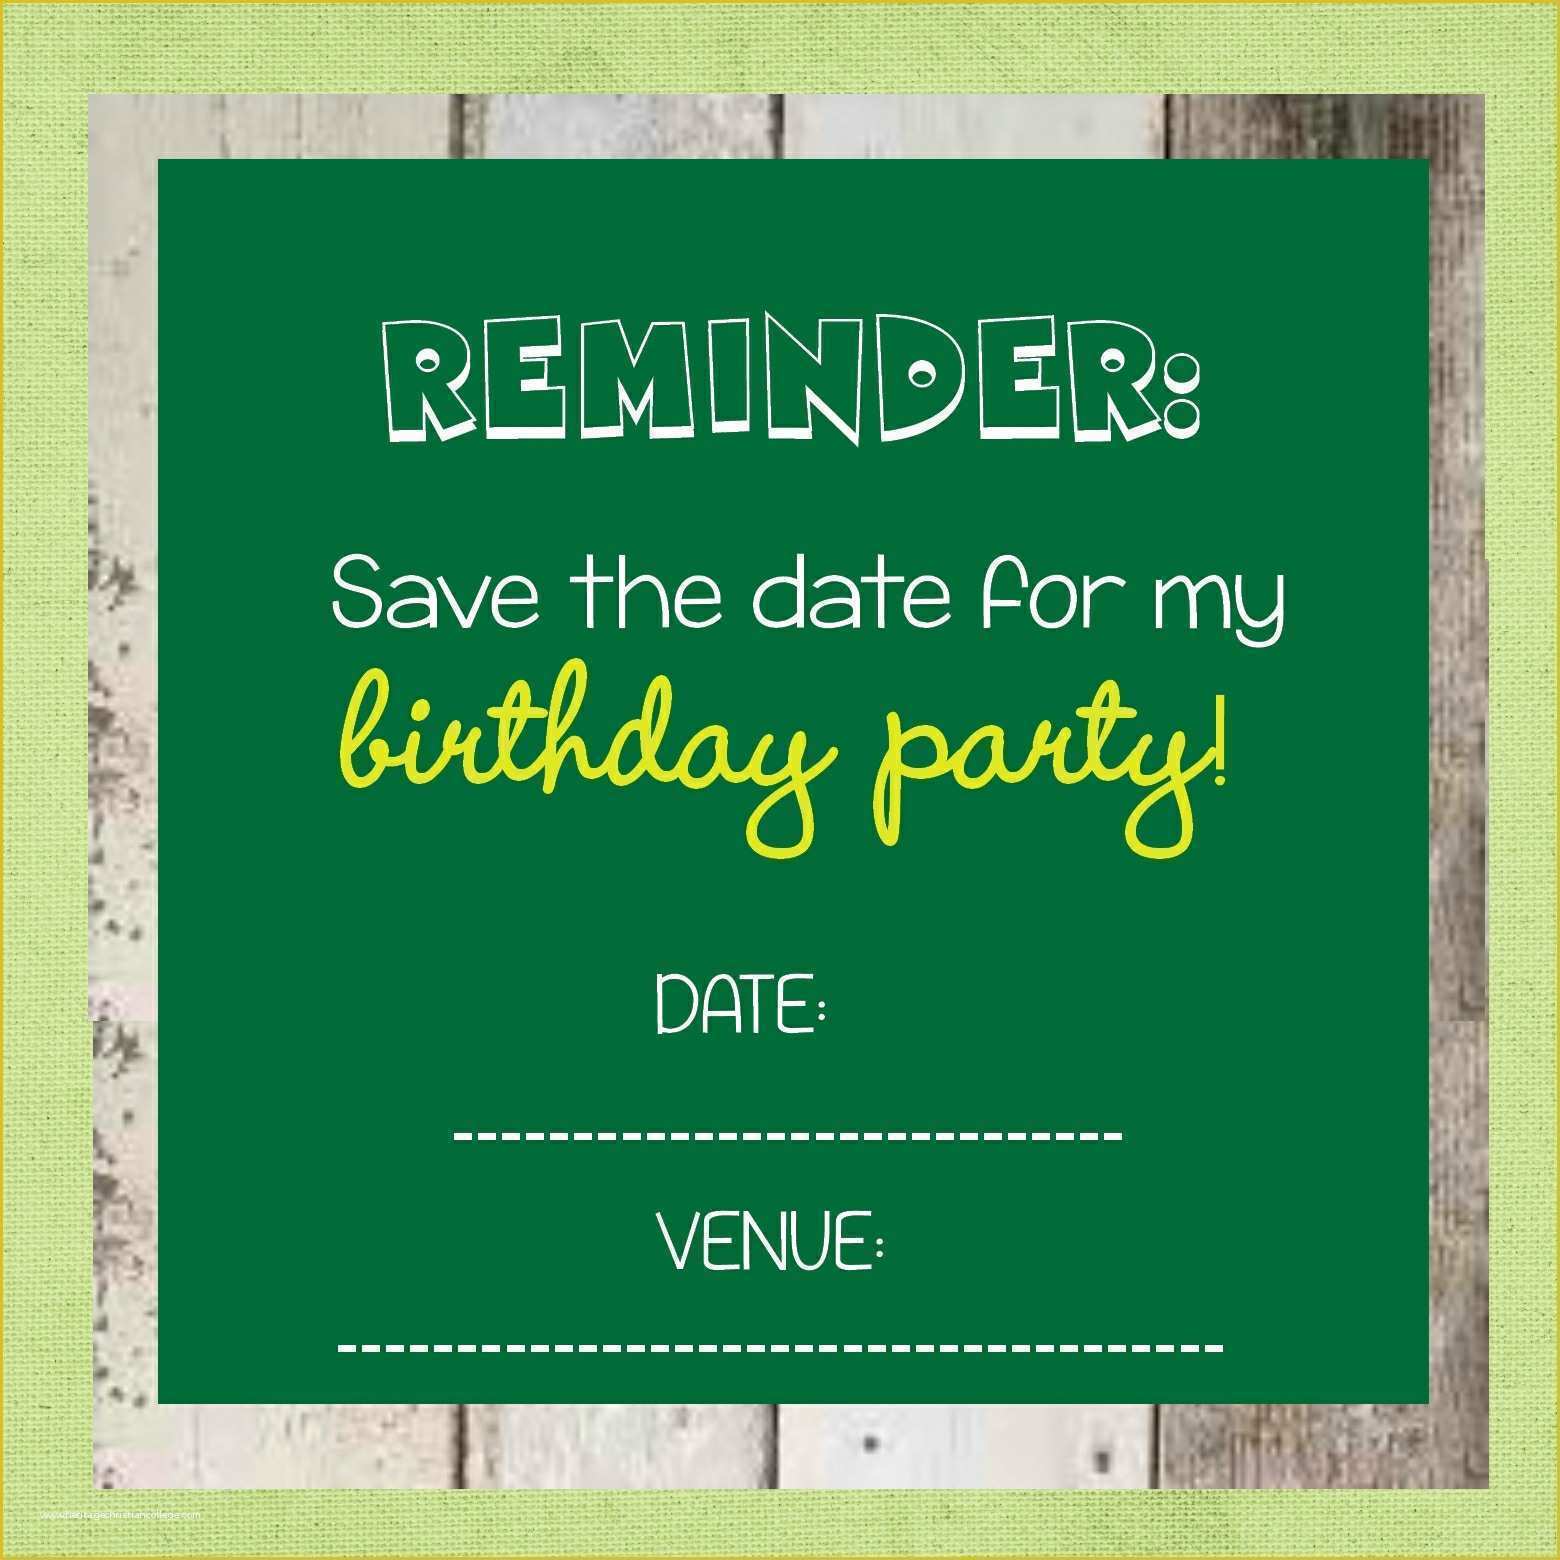 Birthday Party Save the Date Templates Free Of Save the Date Templates Free